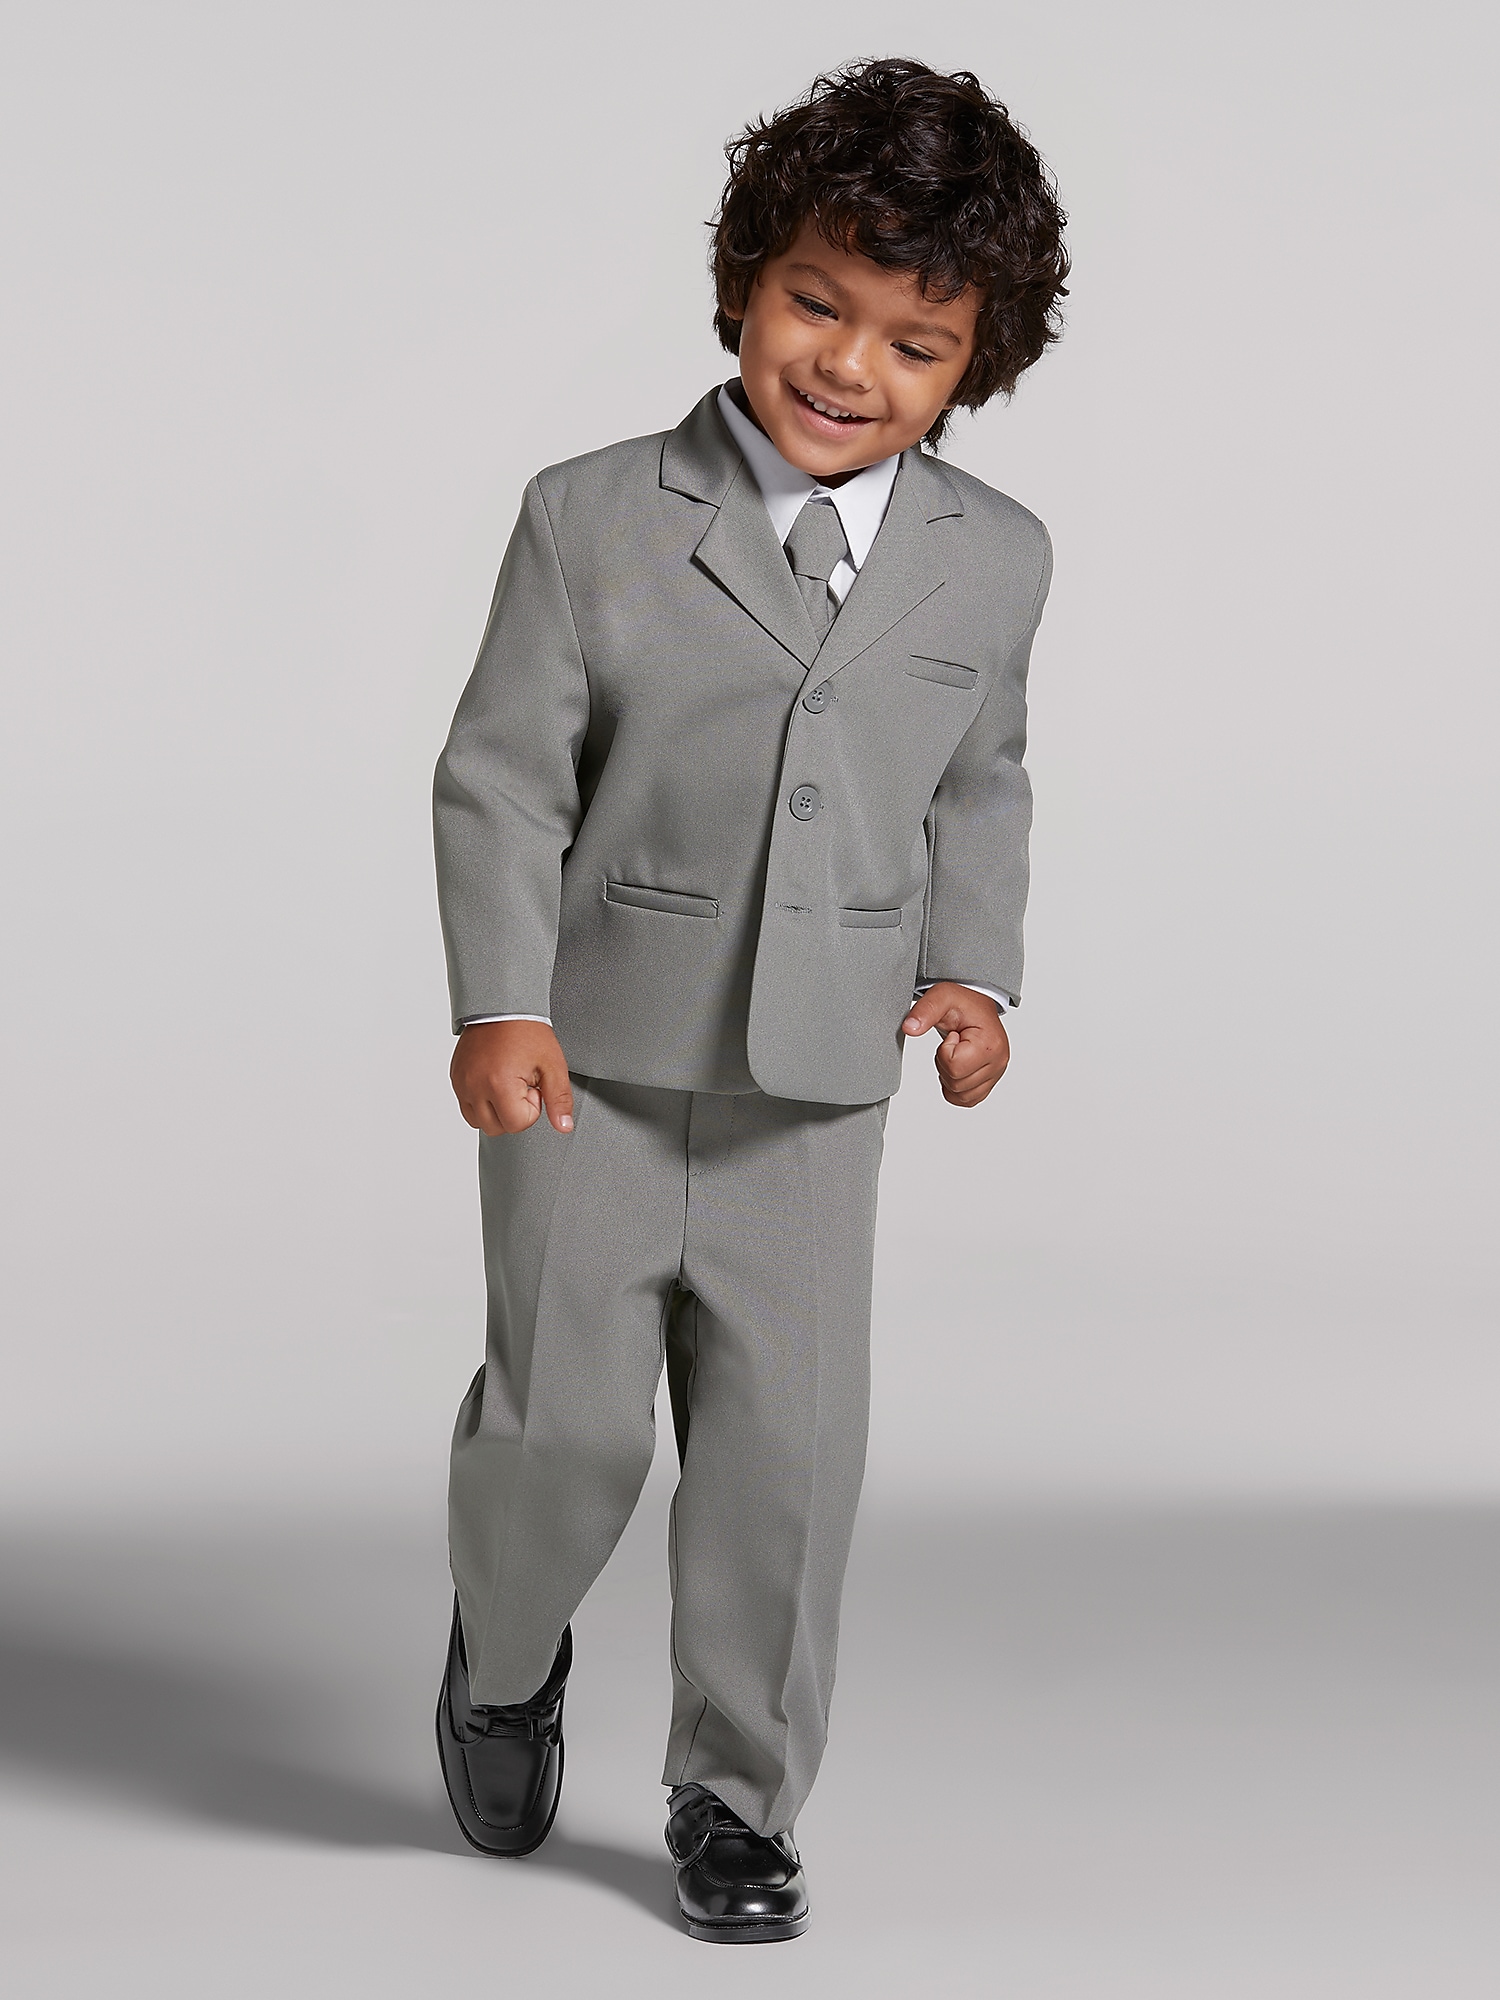 Peanut Butter Collection Gray Toddler's Tuxedo - Men's Boys Suits ...